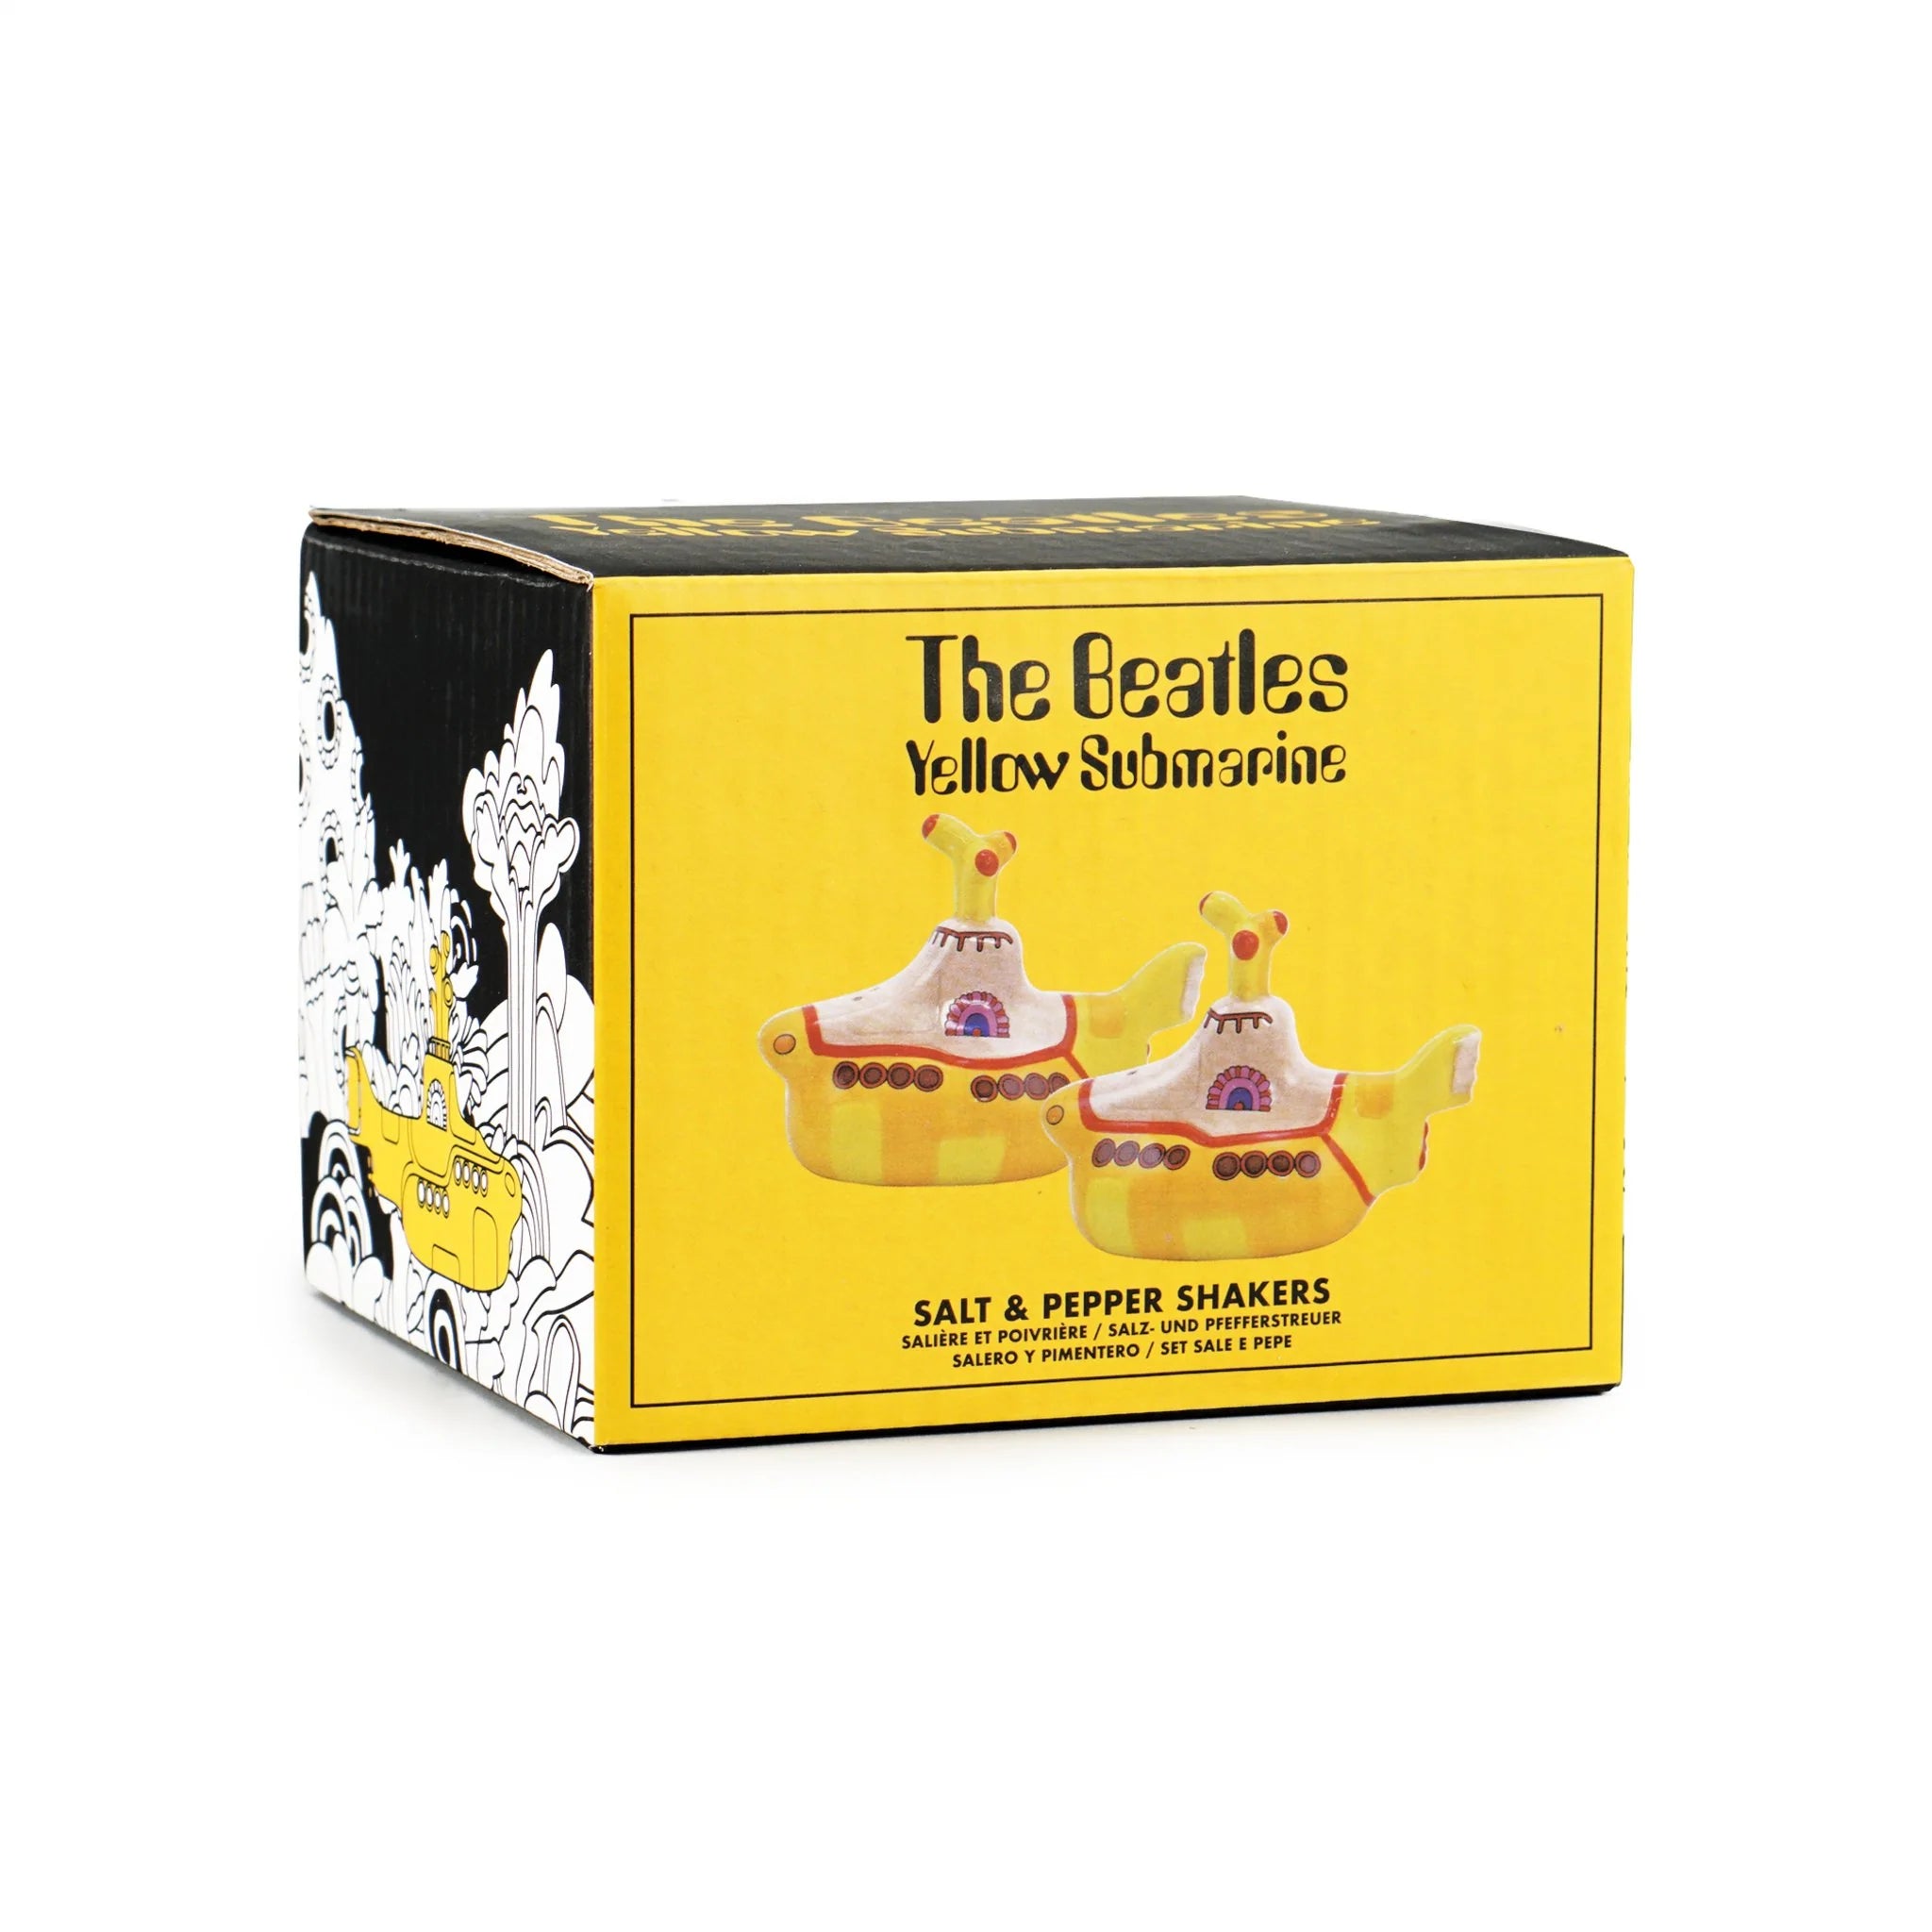 The Beatles - Yellow Sub. Salt and Pepper Shakers Boxed